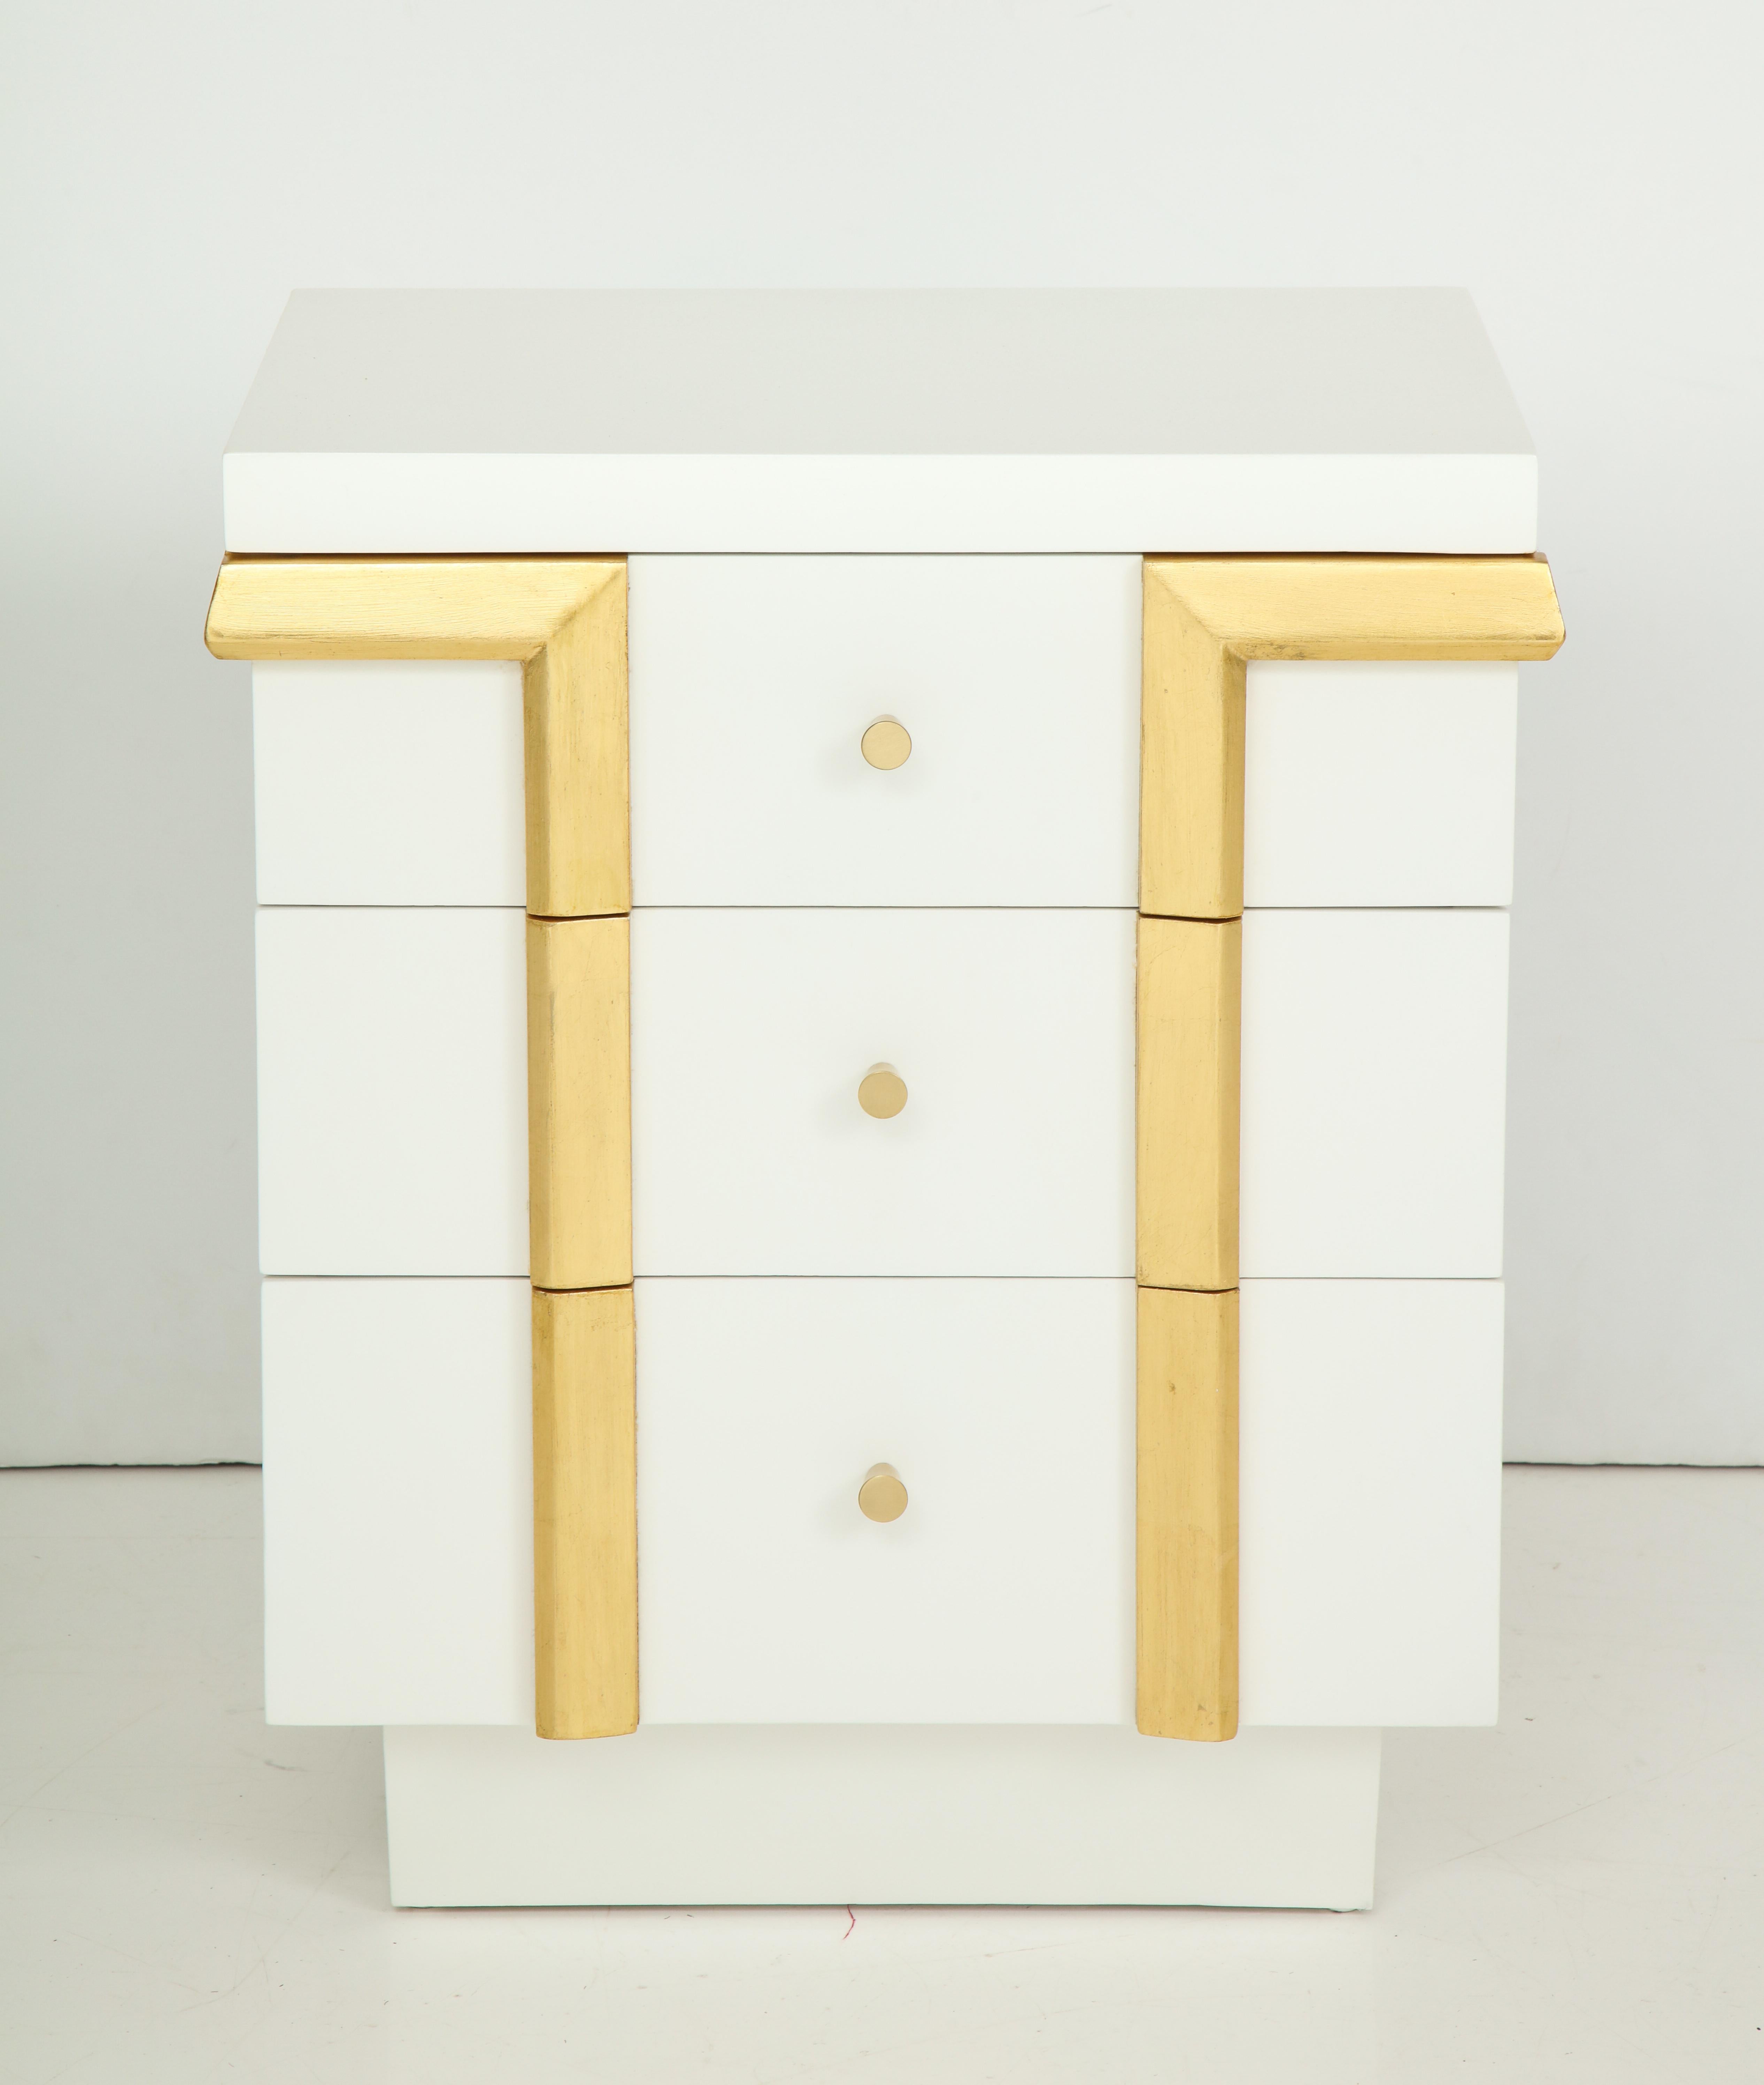 Pair of Art Deco, Hollywood Regency nightstands in a custom matte white lacquer finish with contrasting 22-karat gold leaf trim and satin brass conical pulls.